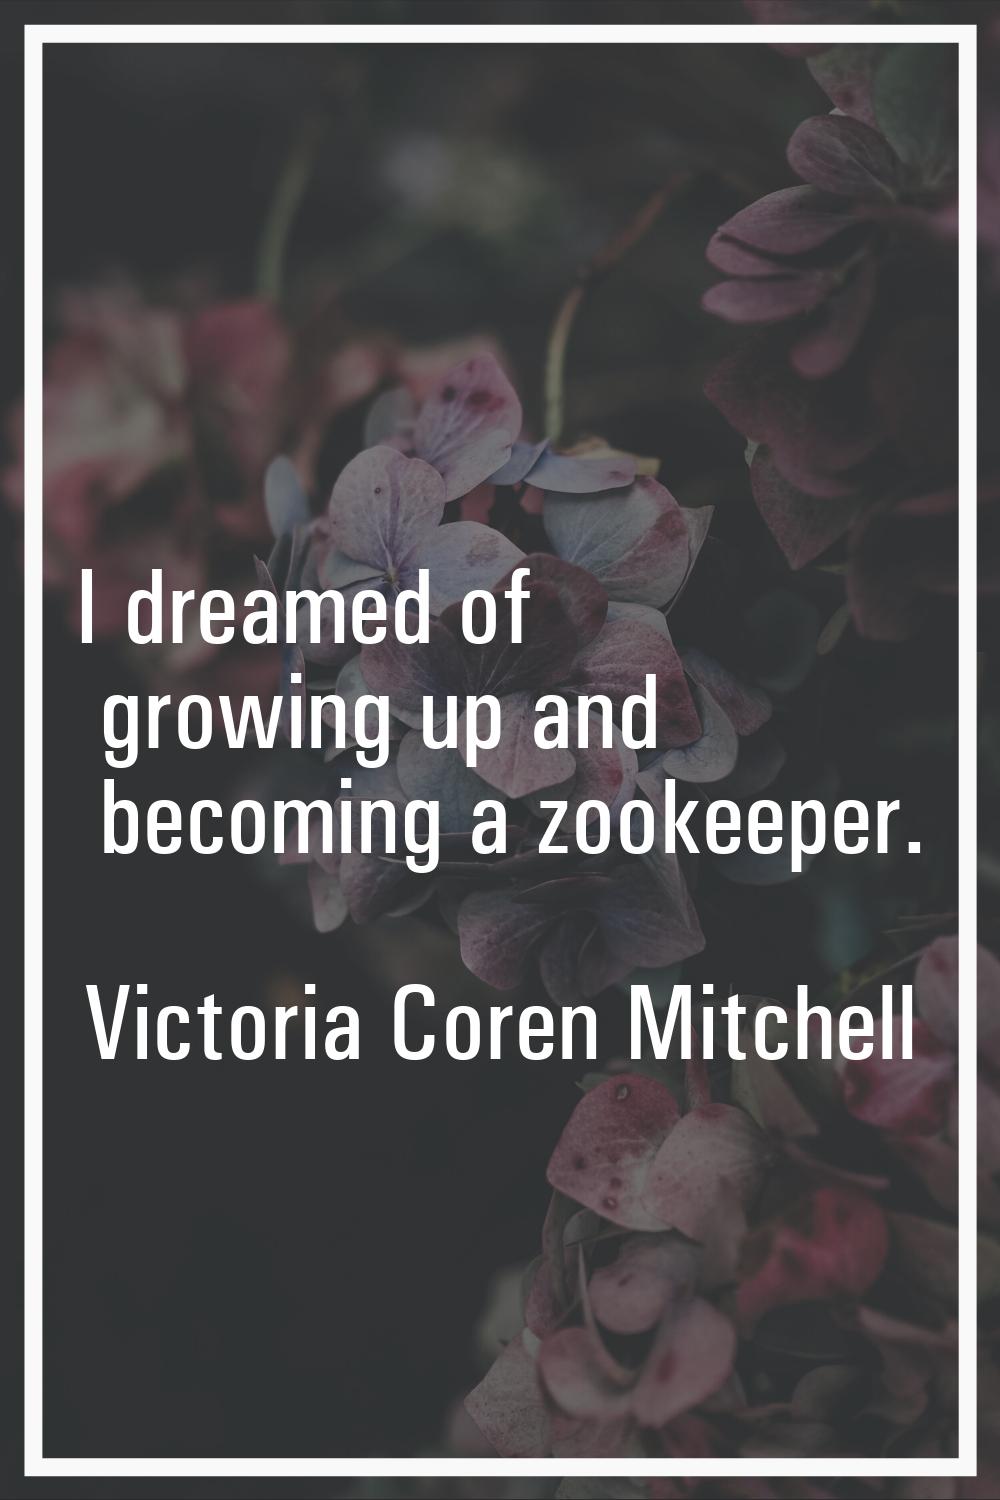 I dreamed of growing up and becoming a zookeeper.